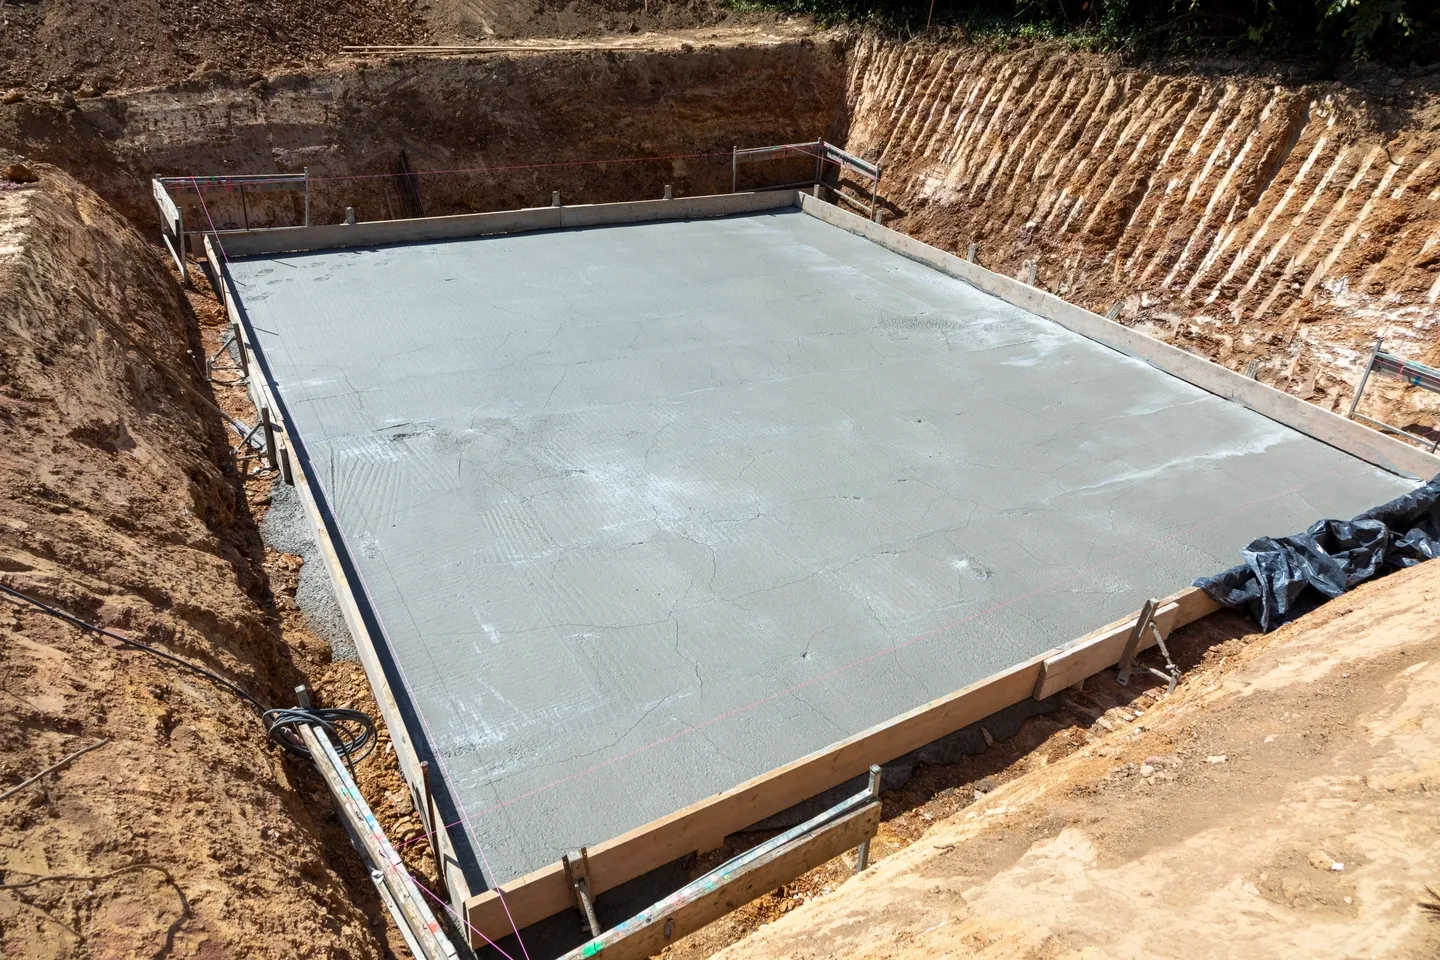 A concrete slab is being poured for the foundation of a house.